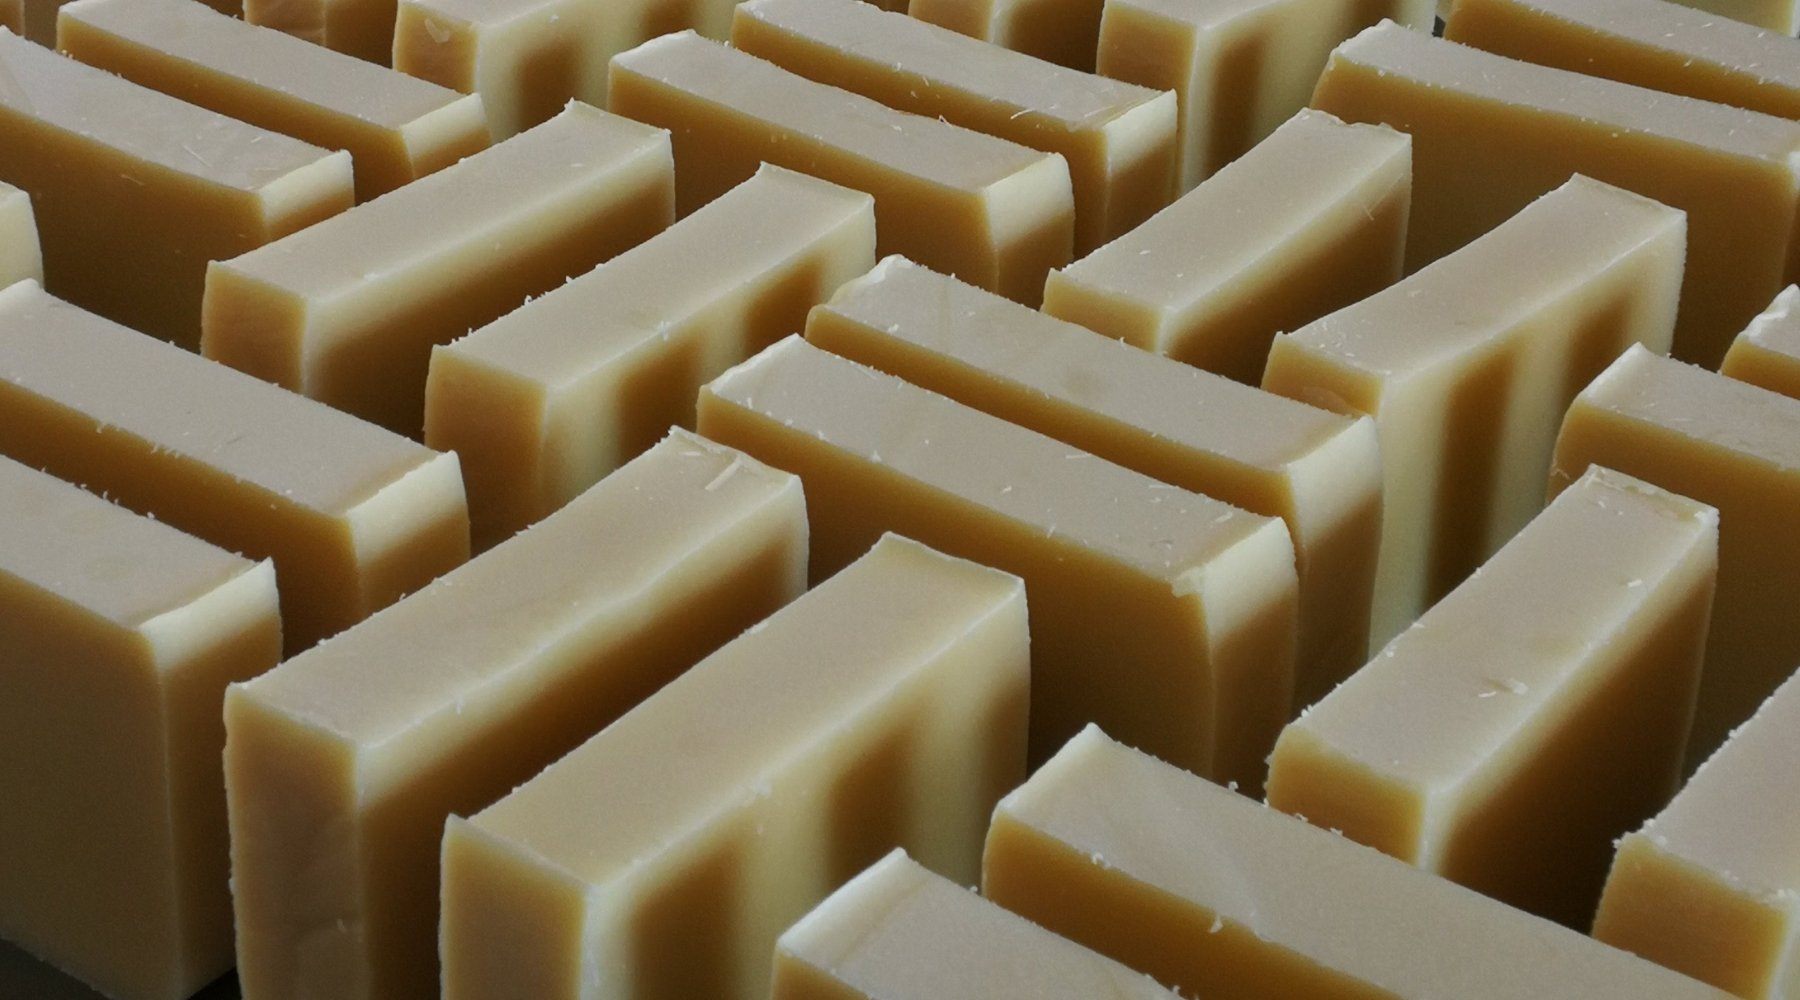 So you want to be a soap maker?